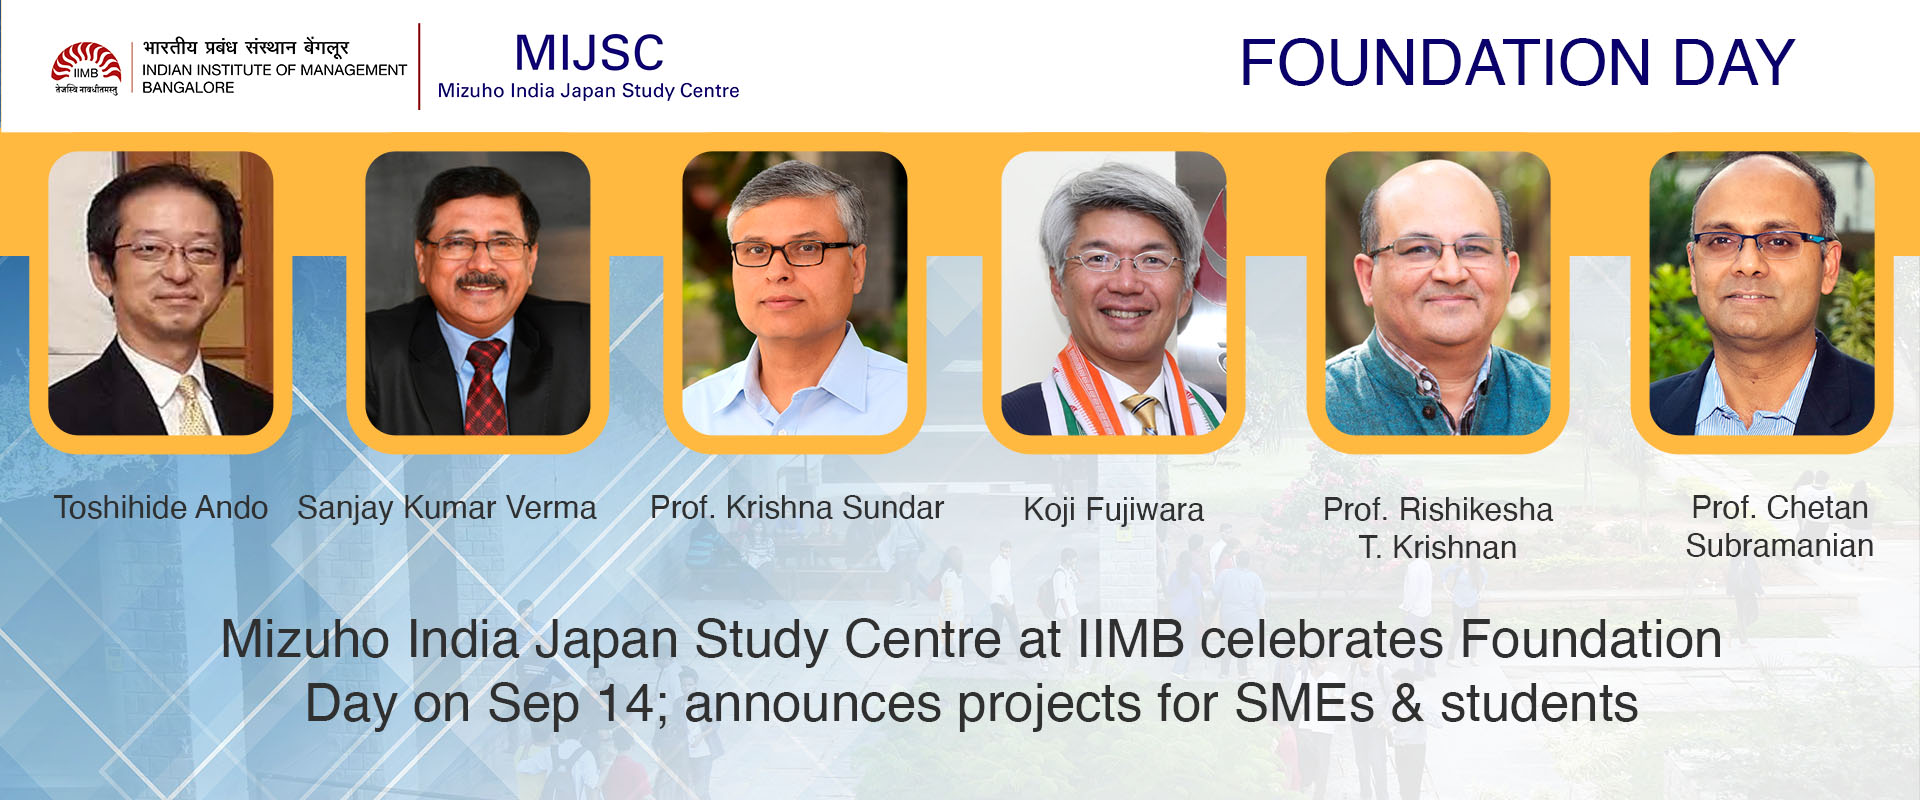 Mizuho India Japan Study Centre at IIMB celebrates Foundation Day on Sep 14; announces projects for SMEs & students